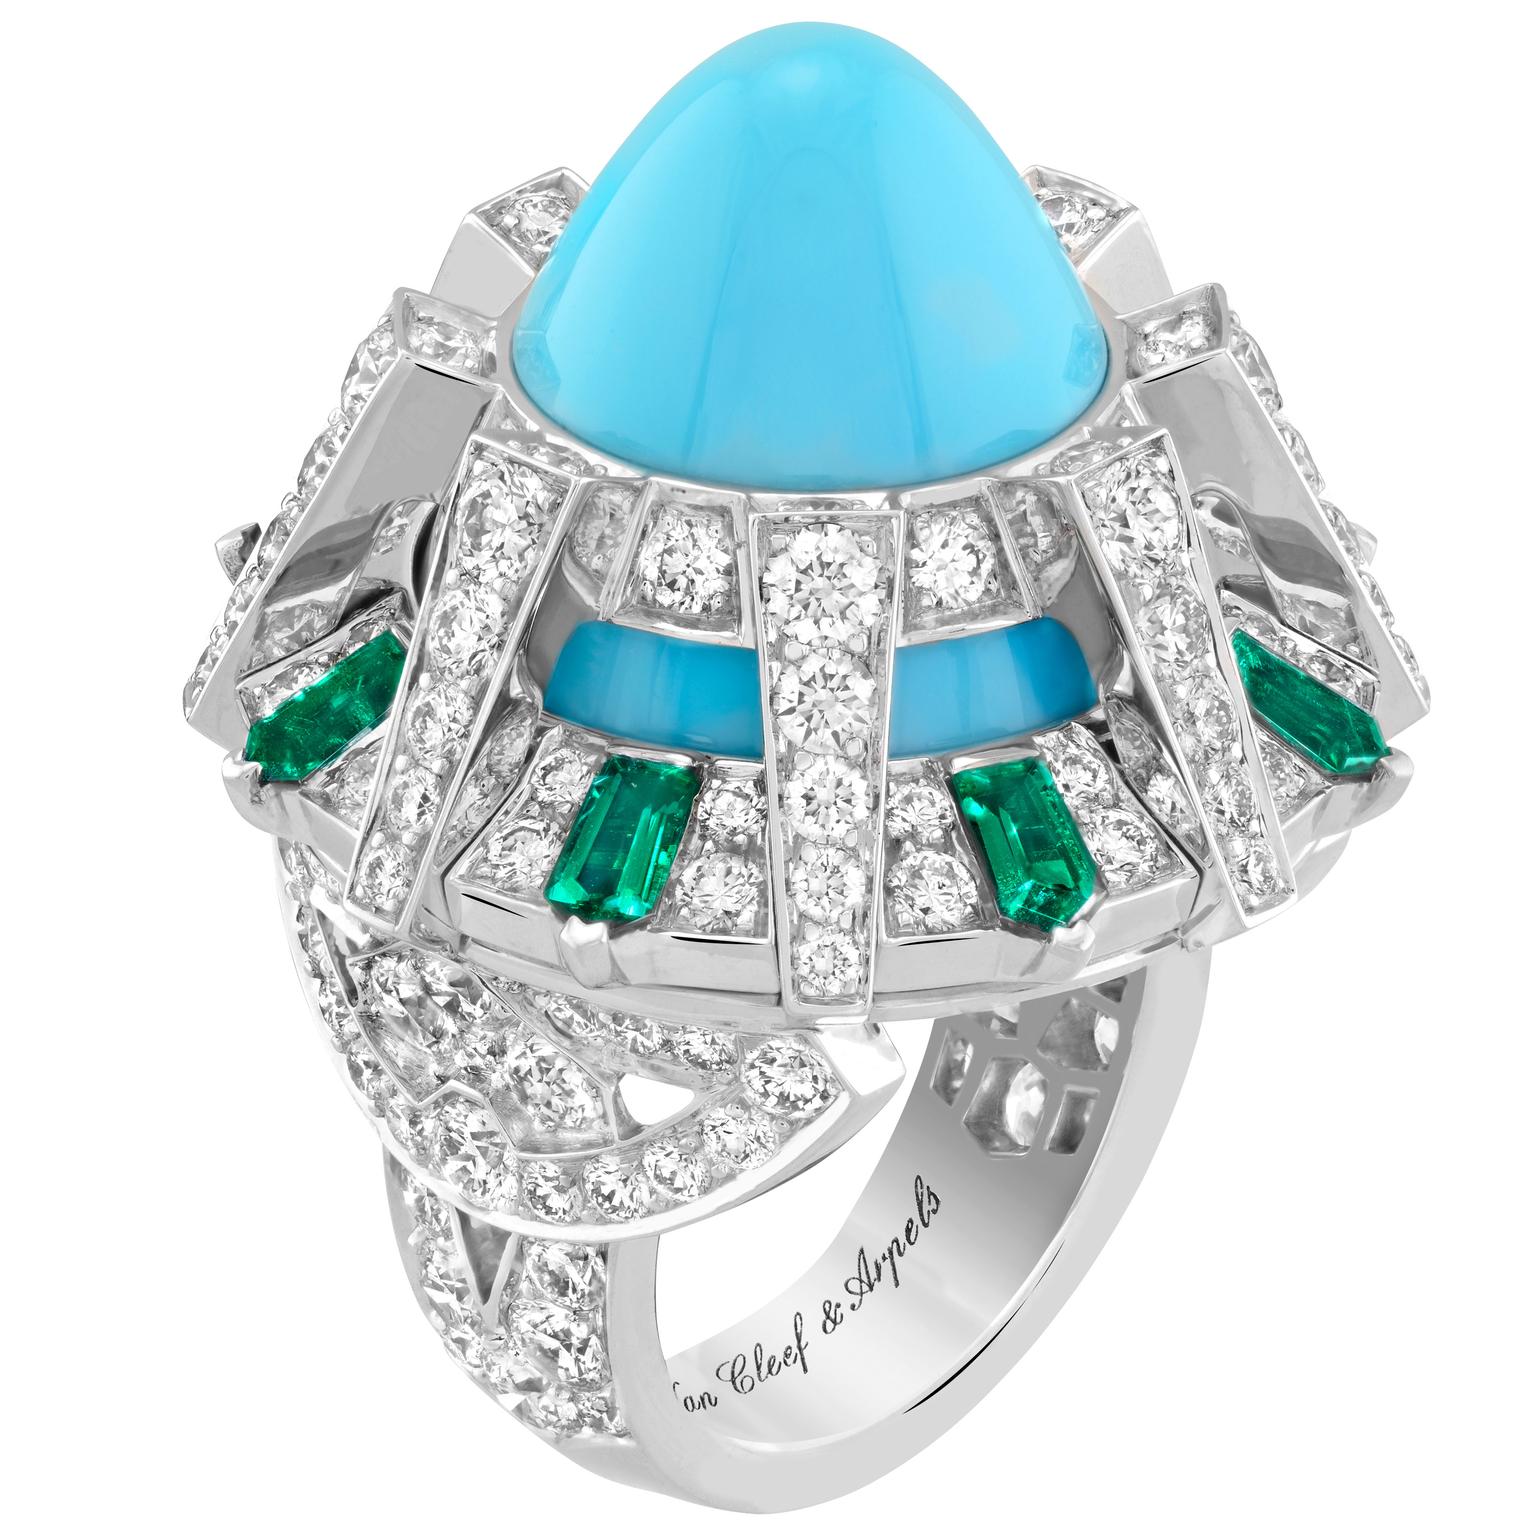 Temple turquoise ring by Van Cleef & Arpels